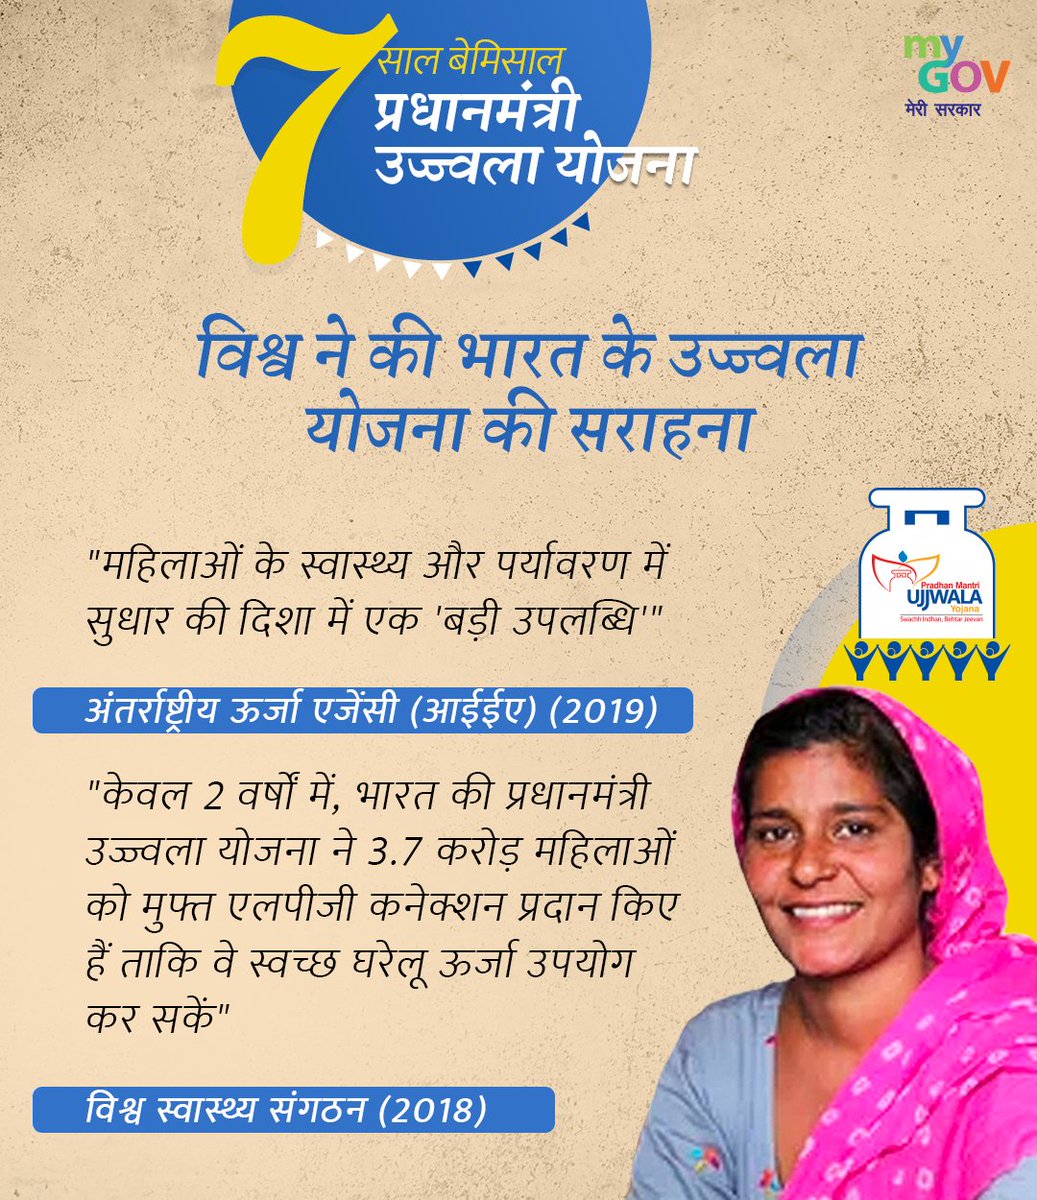 The world recognizes India’s effort to provide clean fuel to its citizens. Ujjwala has helped to empower our #NariShakti.

Here's what the world has to say about PM Ujjwala Yojana.

#7YearsOfUjjwala
#UjwallaSeUjwalBharat
#UjjwalaYojana